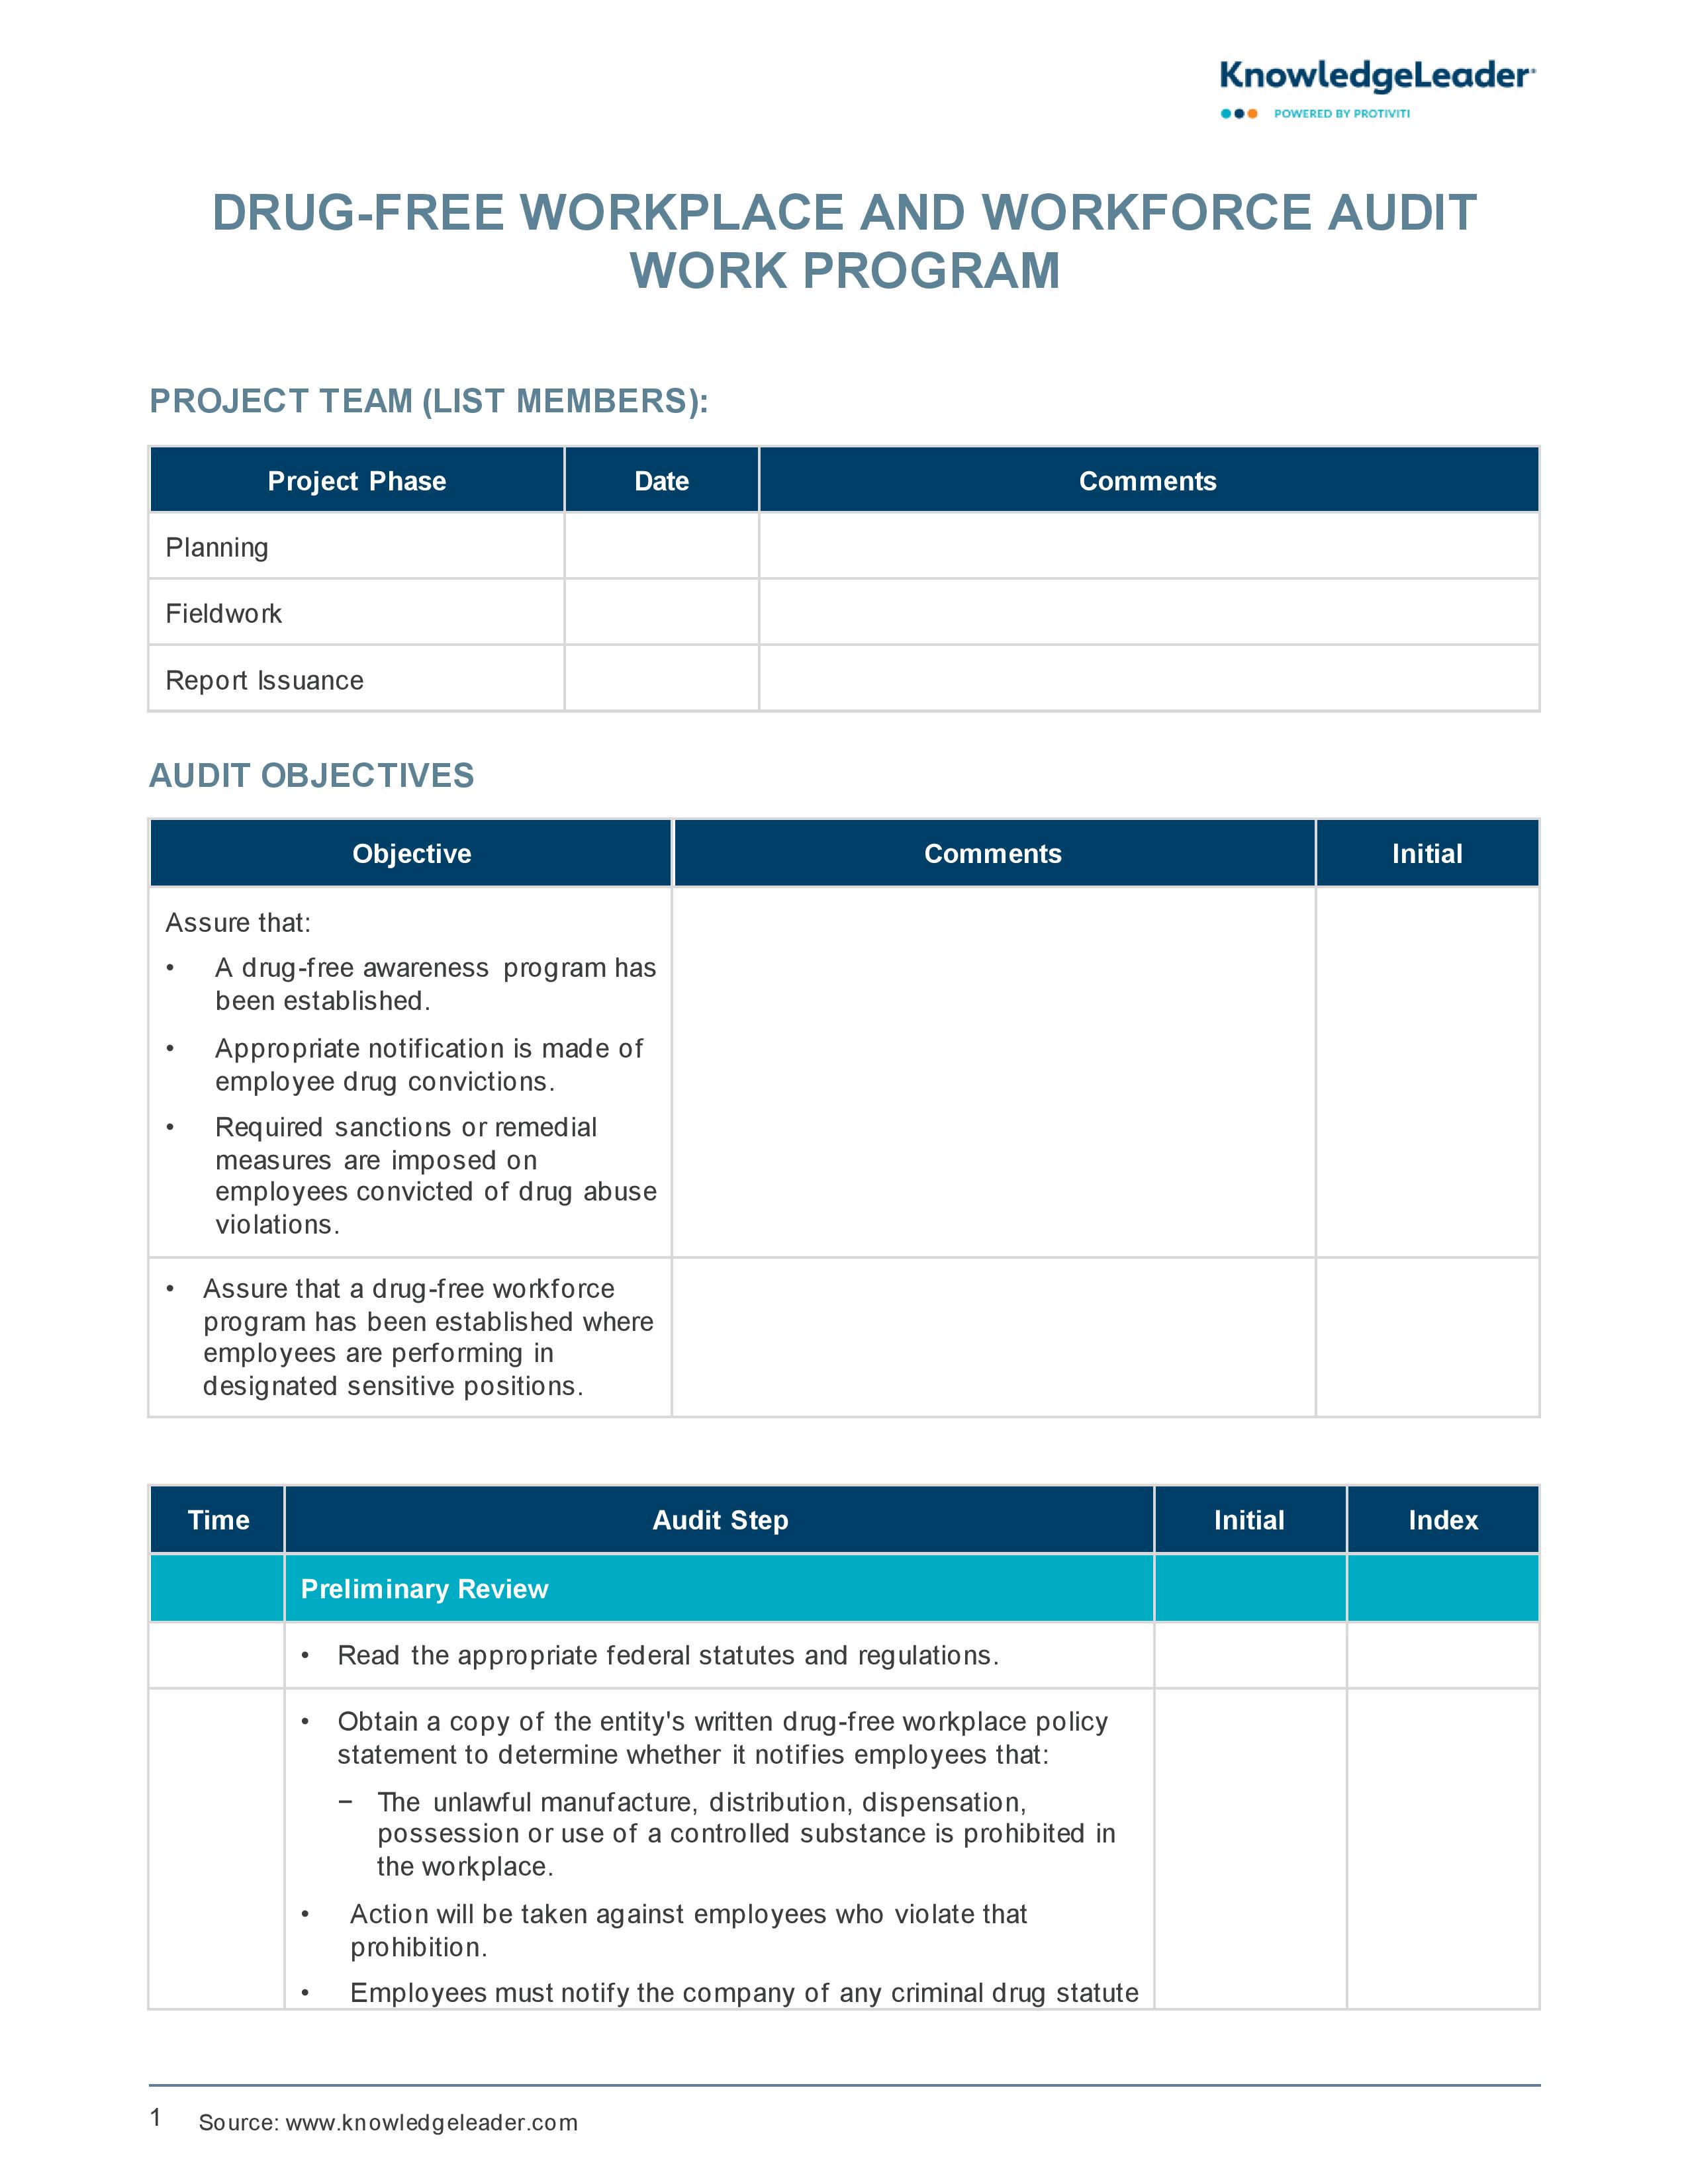 Screenshot of the first page of Drug-Free Workplace and Workforce Audit Work Program